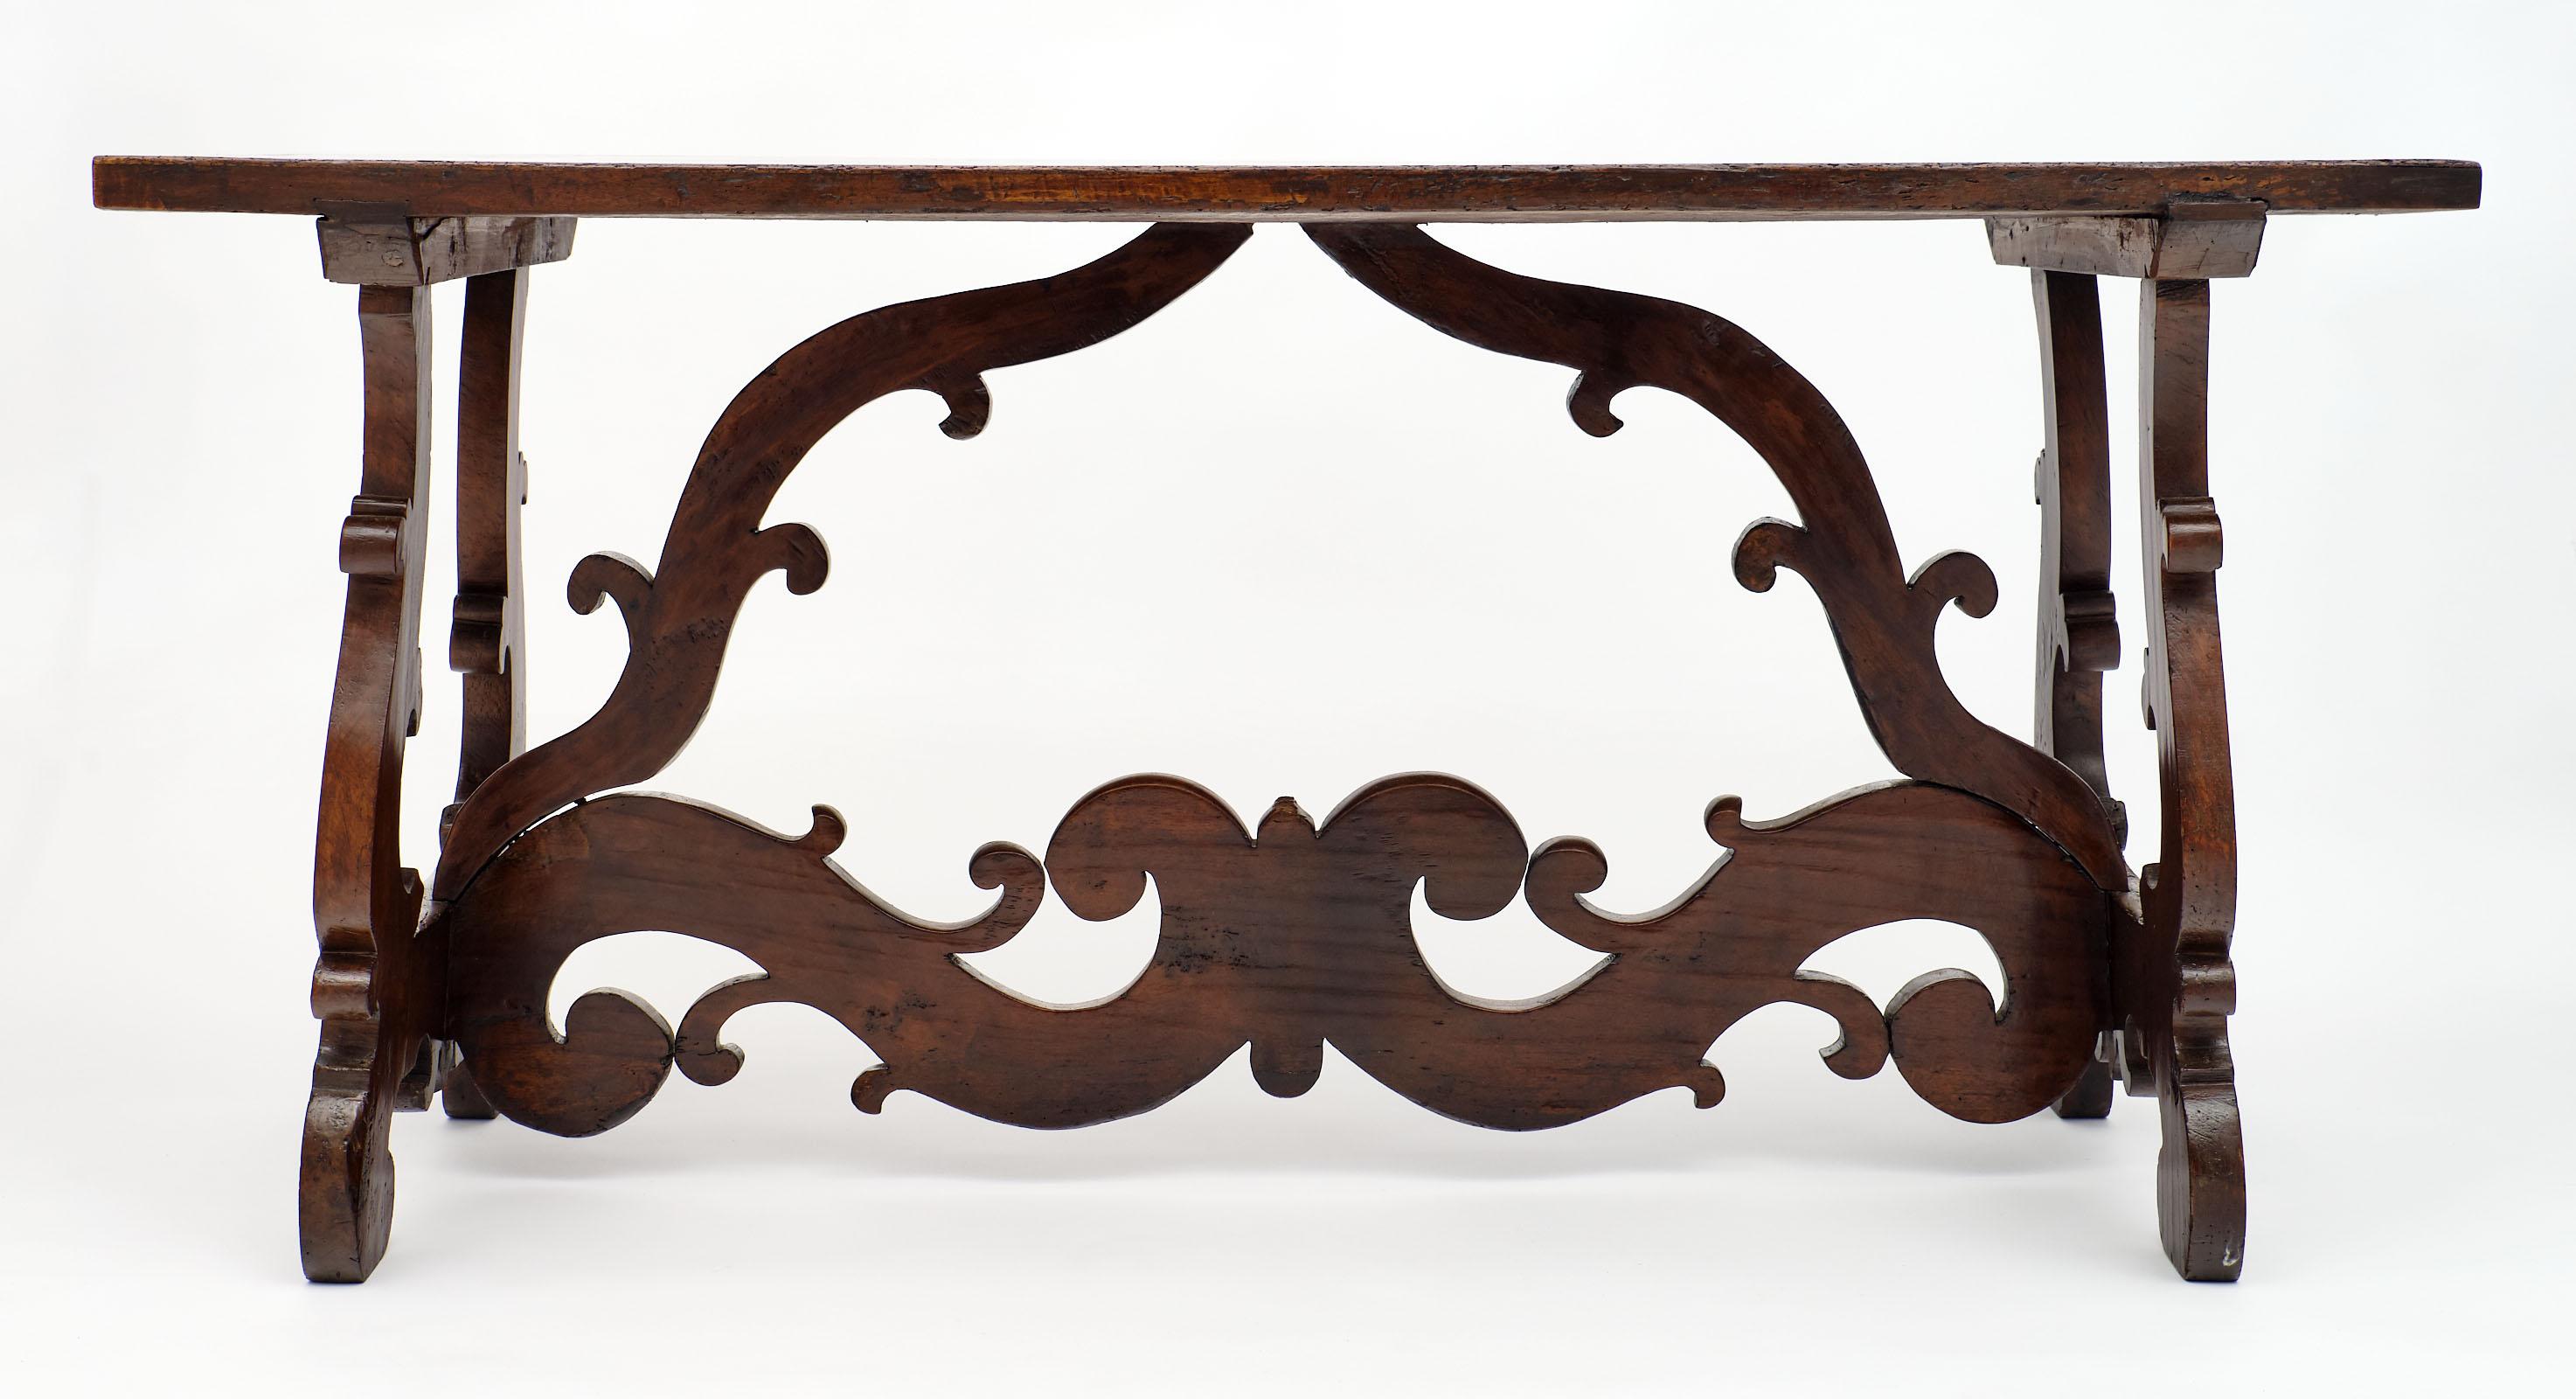 Solid walnut antique Spanish Renaissance “Lyra” Trestle table, finely hand carved base featuring two Lyra pedestals connected with an ornately hand carved stretcher. It is finished with a beautiful and lustrous natural wax.